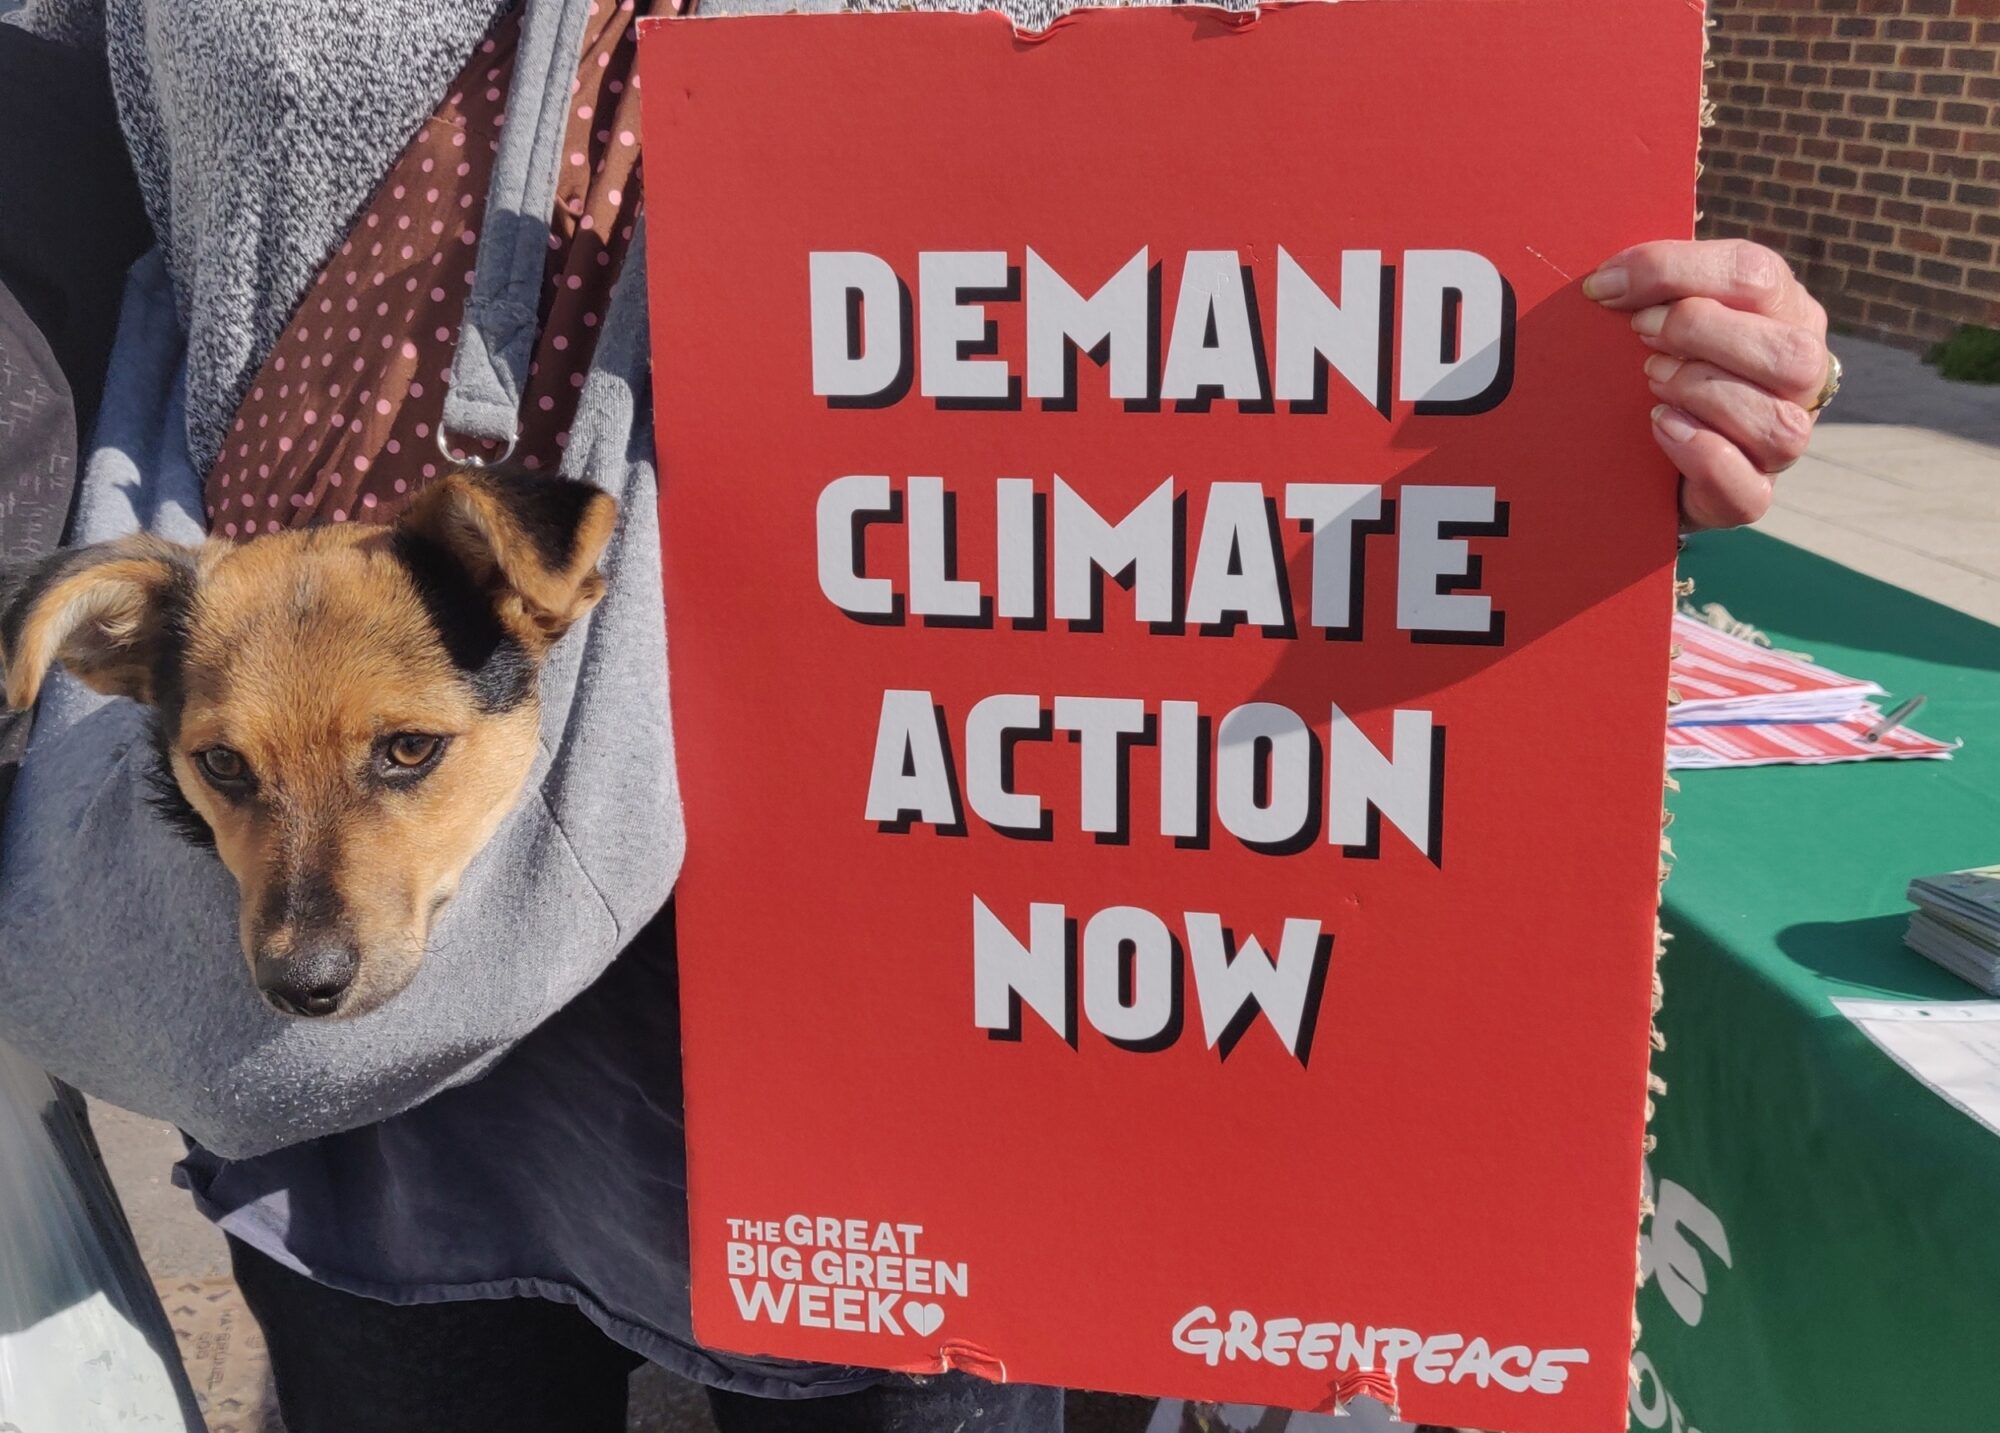 A volunteer holds a red sign reading "Demand Climate Action Now". Their very cute pet dog can be seen next to the sign.